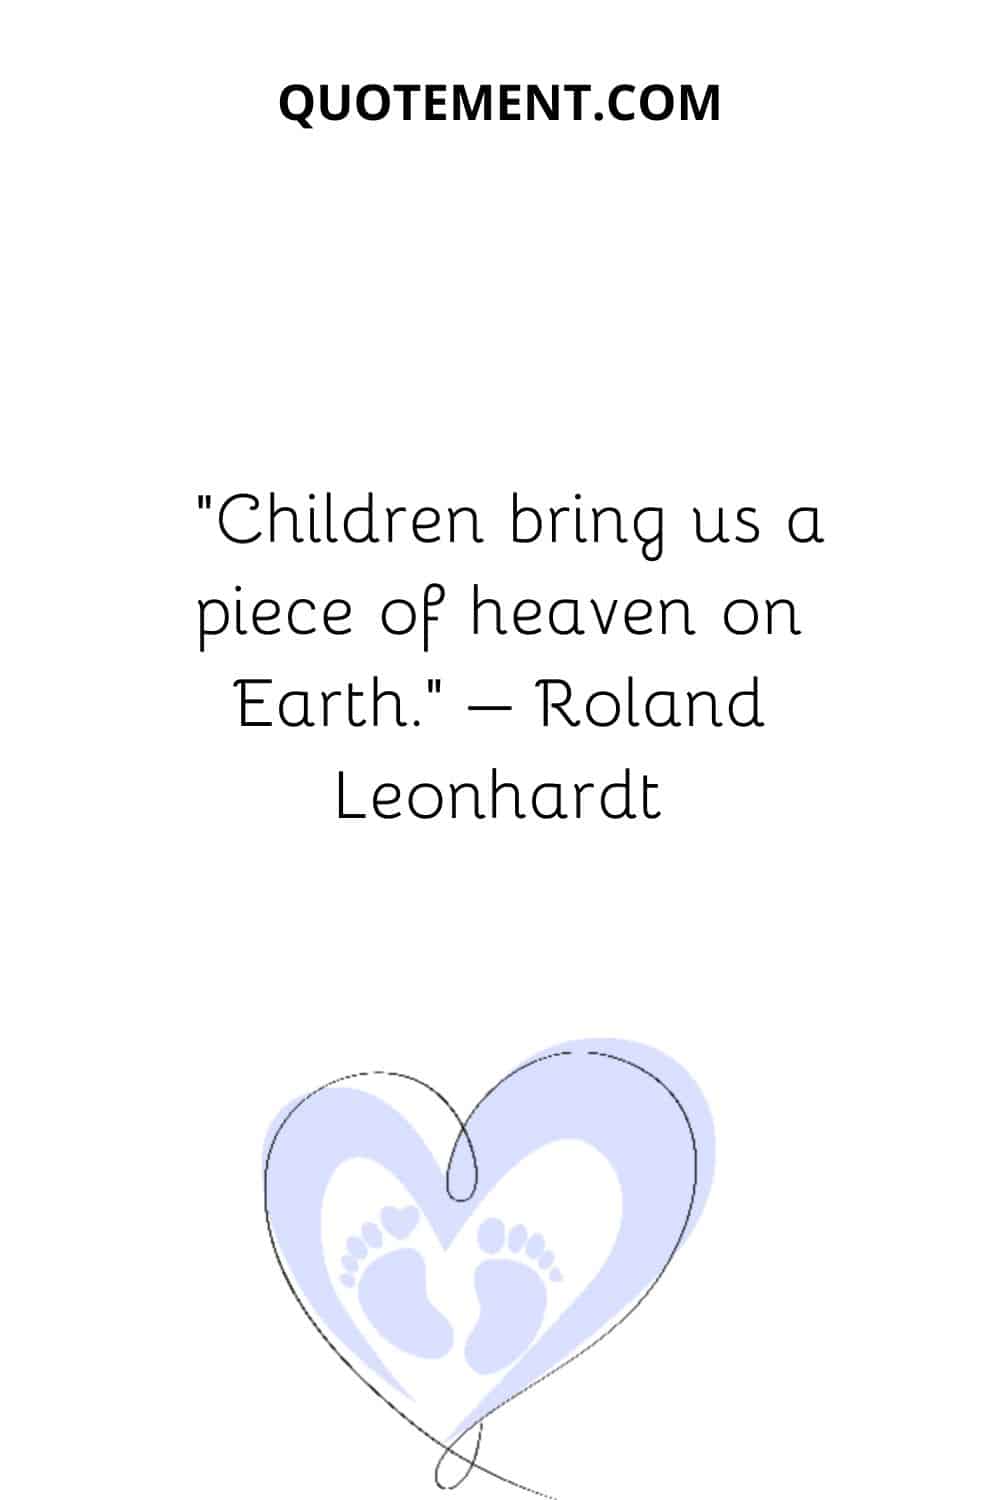 Children bring us a piece of heaven on Earth